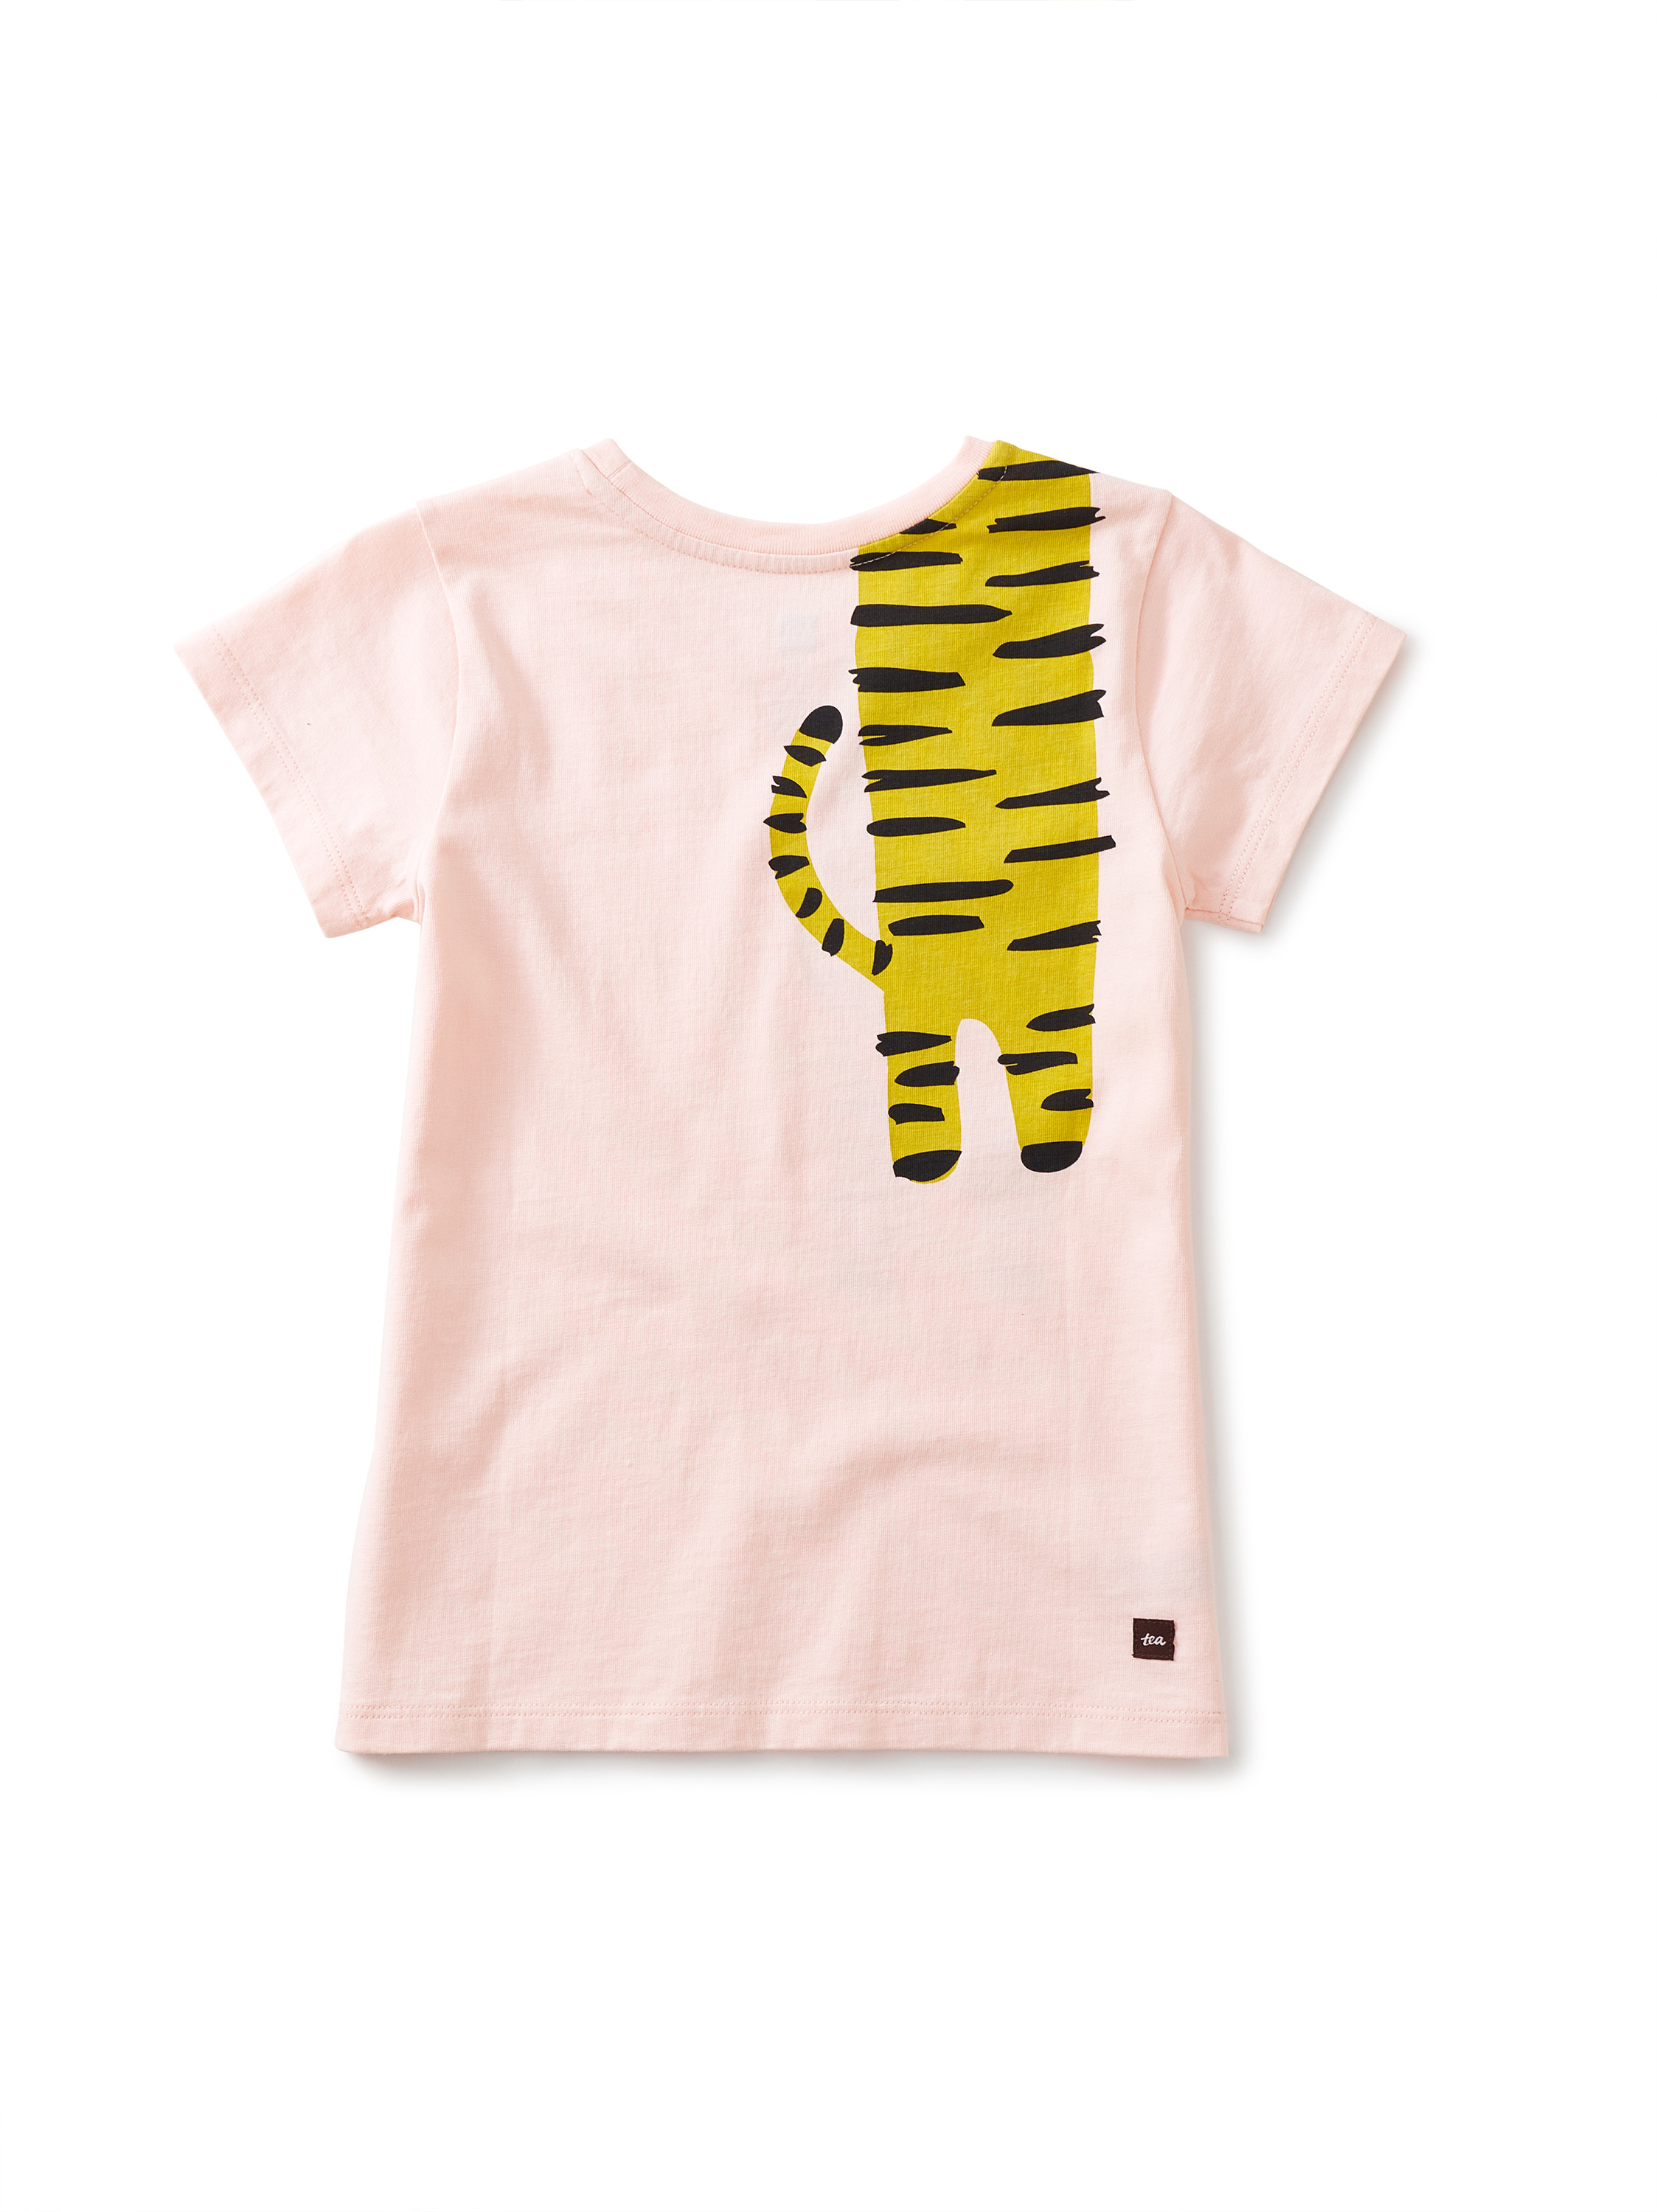 Tiger Turn Graphic Tee | Tea Collection